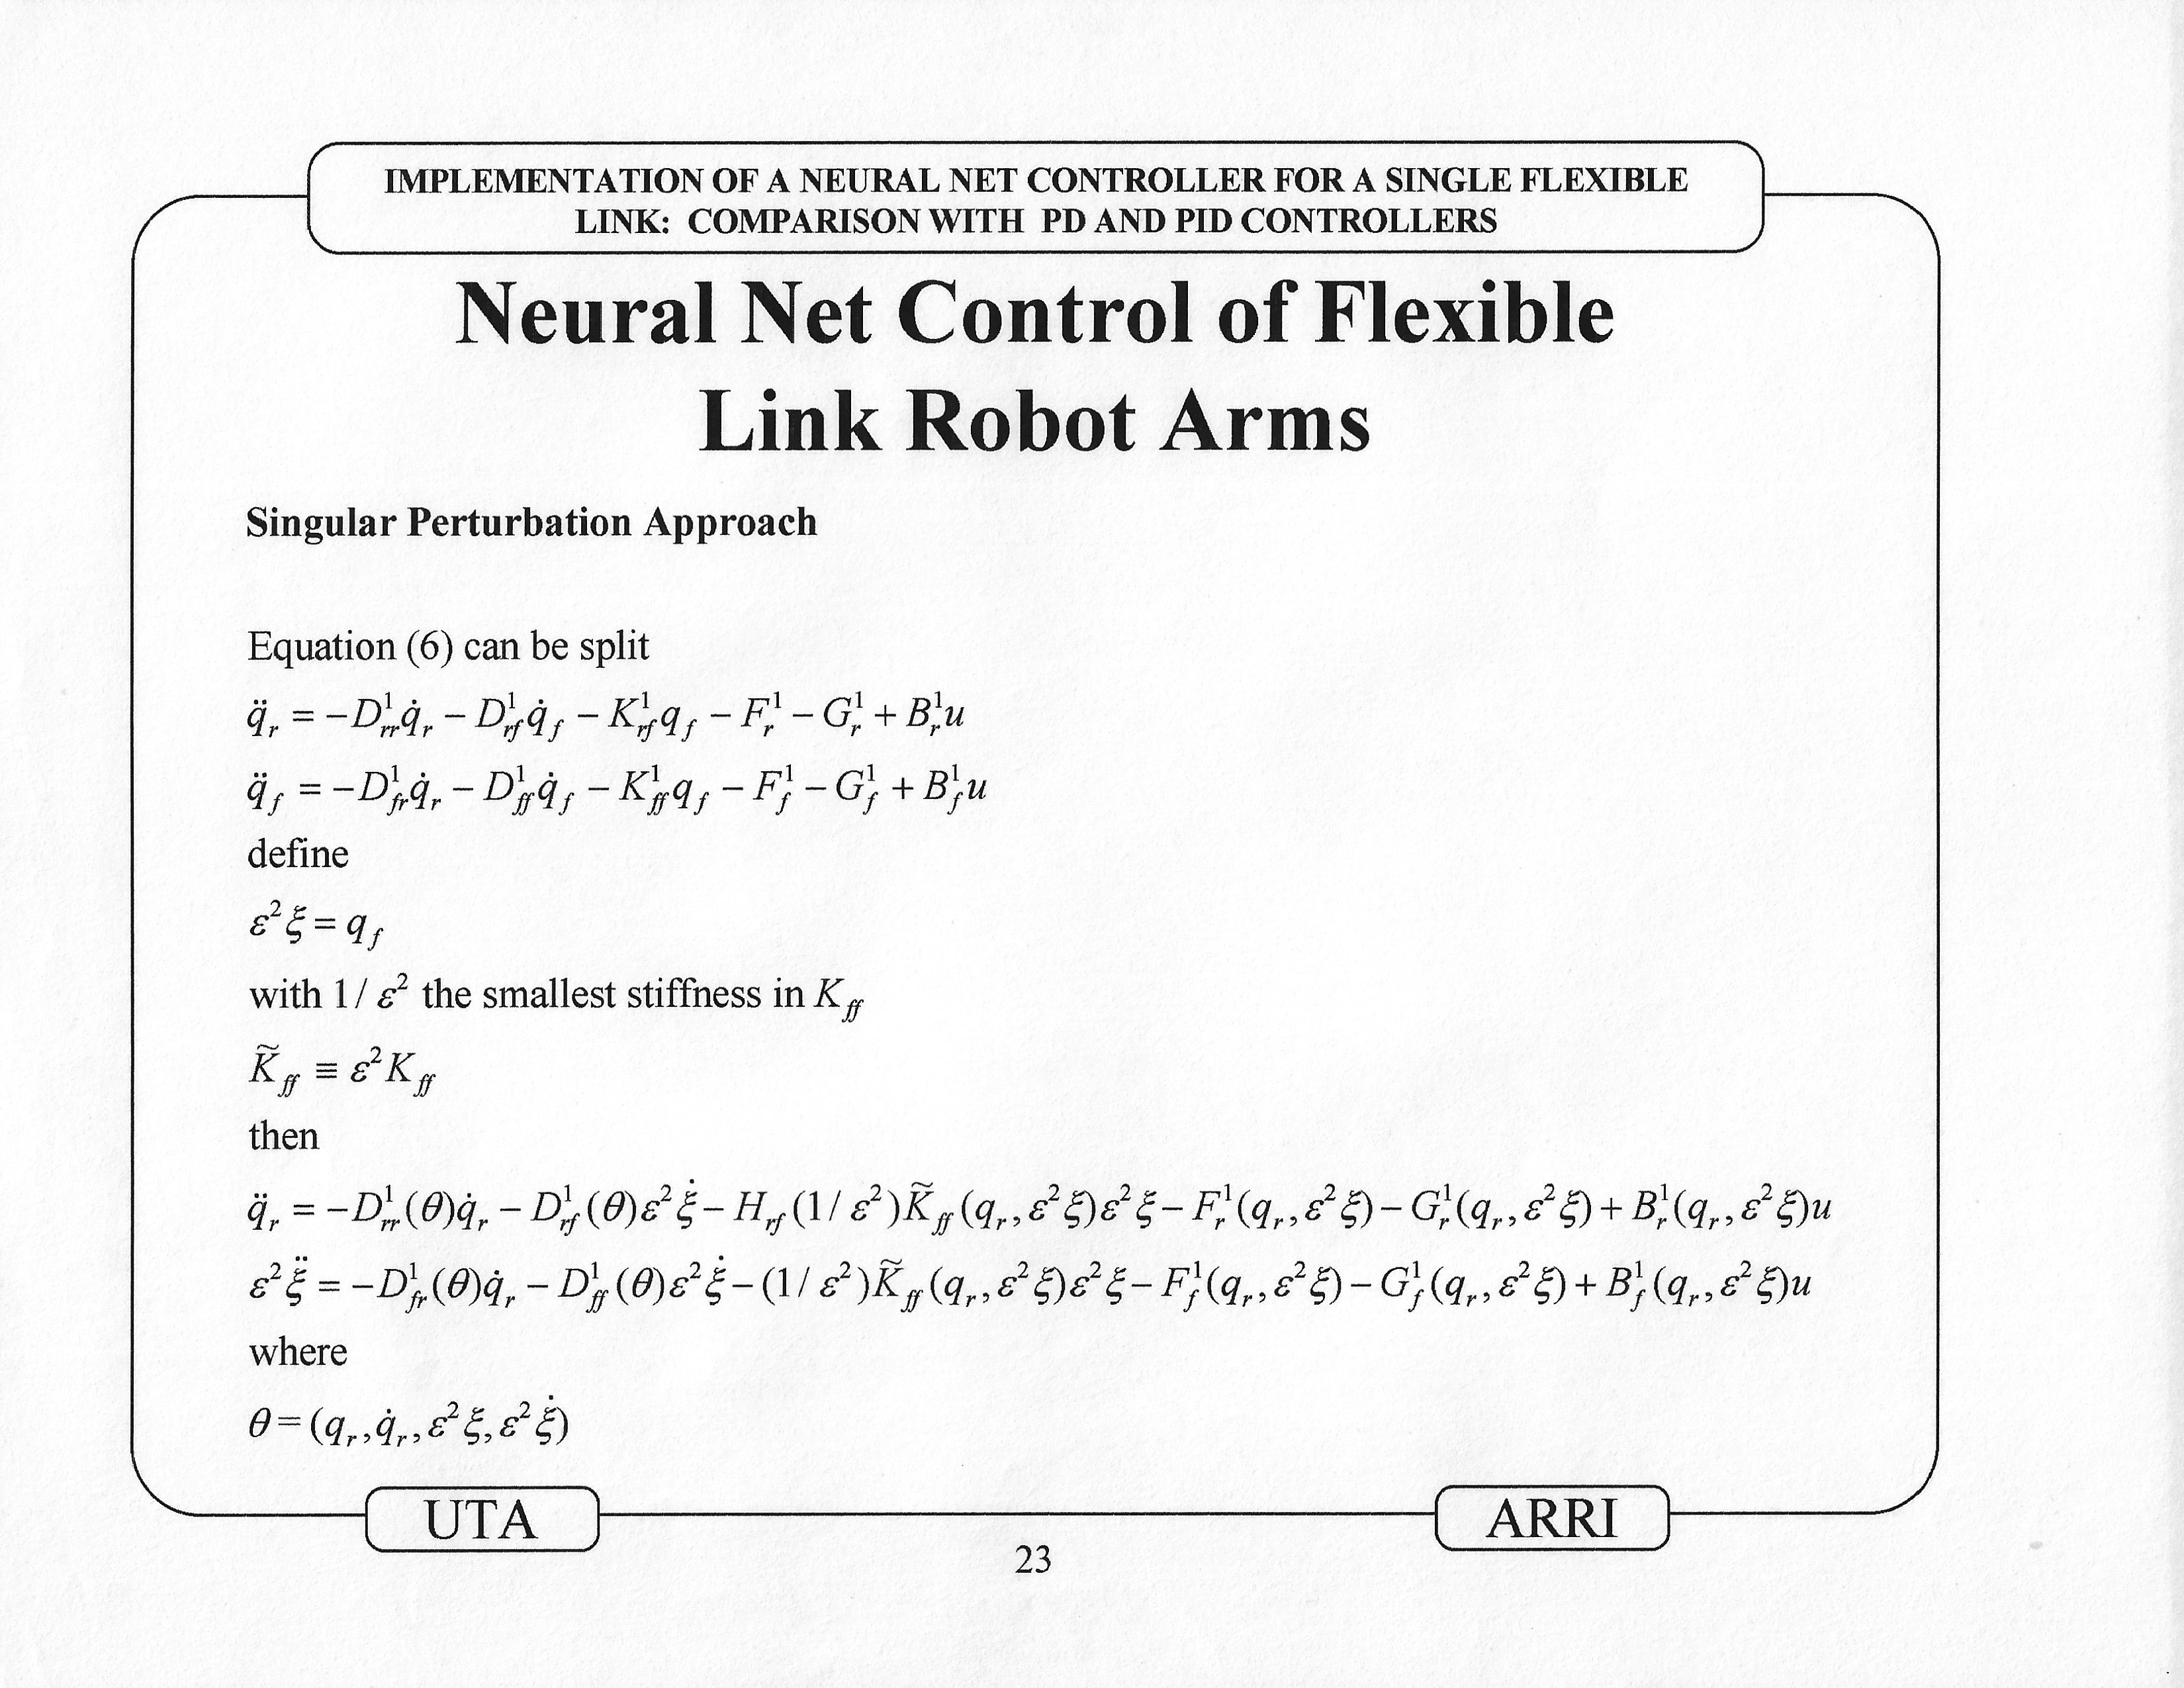 960724_Gutierrez_1996_Implementation_of_a_Neural_Net_Tracking_Controller_for_a_Single_Flexible_Link_Comparison_with_PD_and_PID_controllers_presentation_22